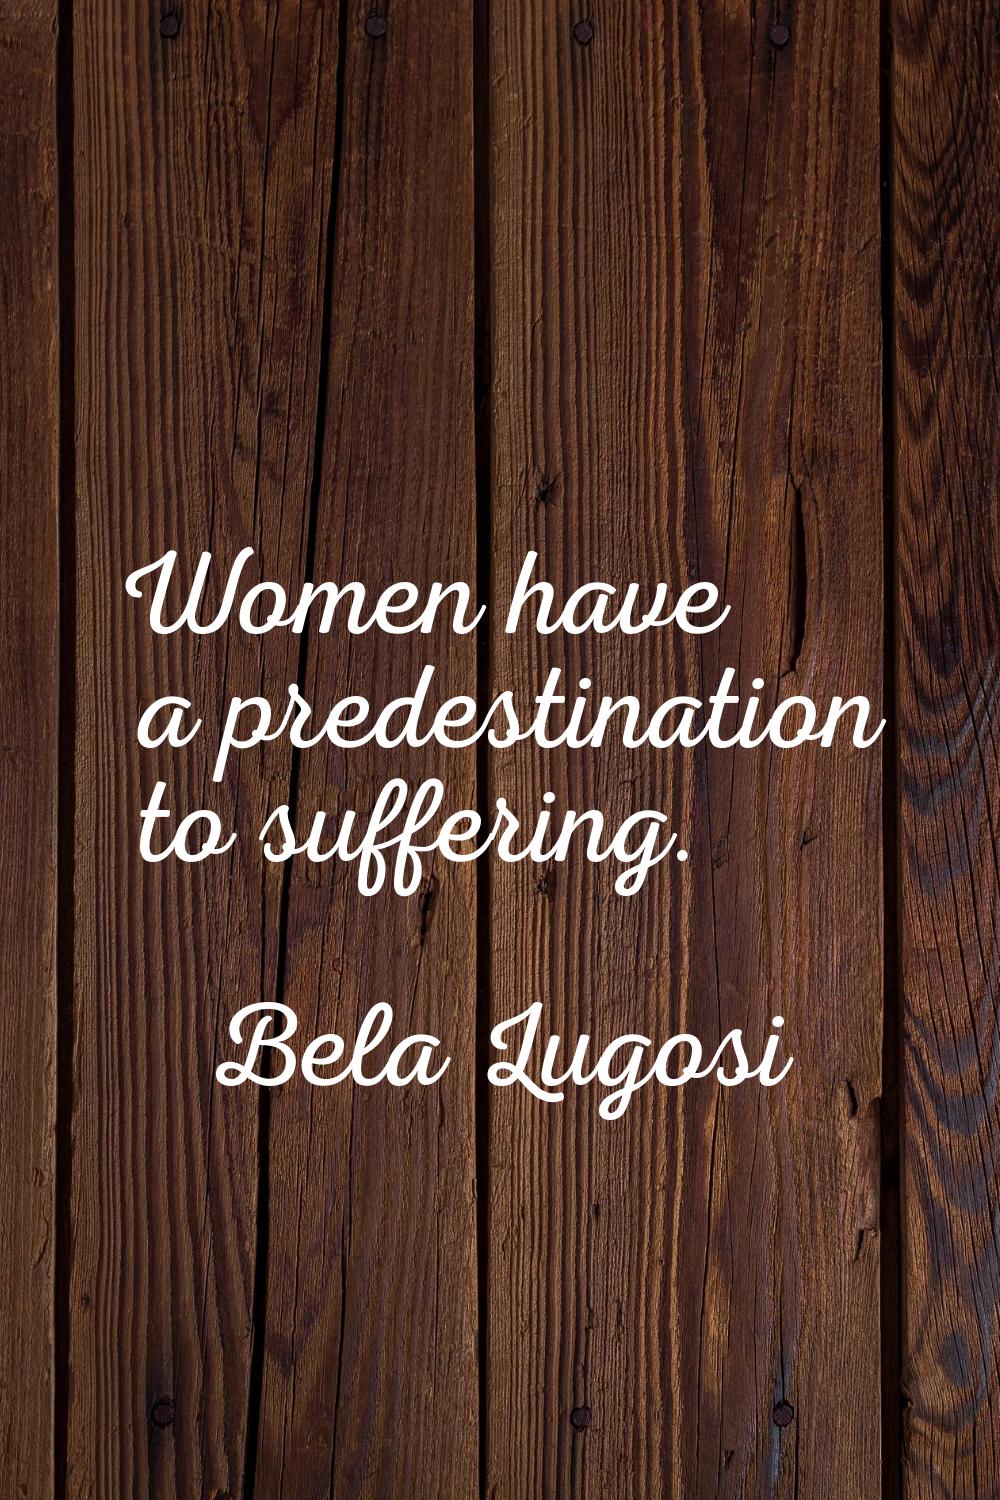 Women have a predestination to suffering.